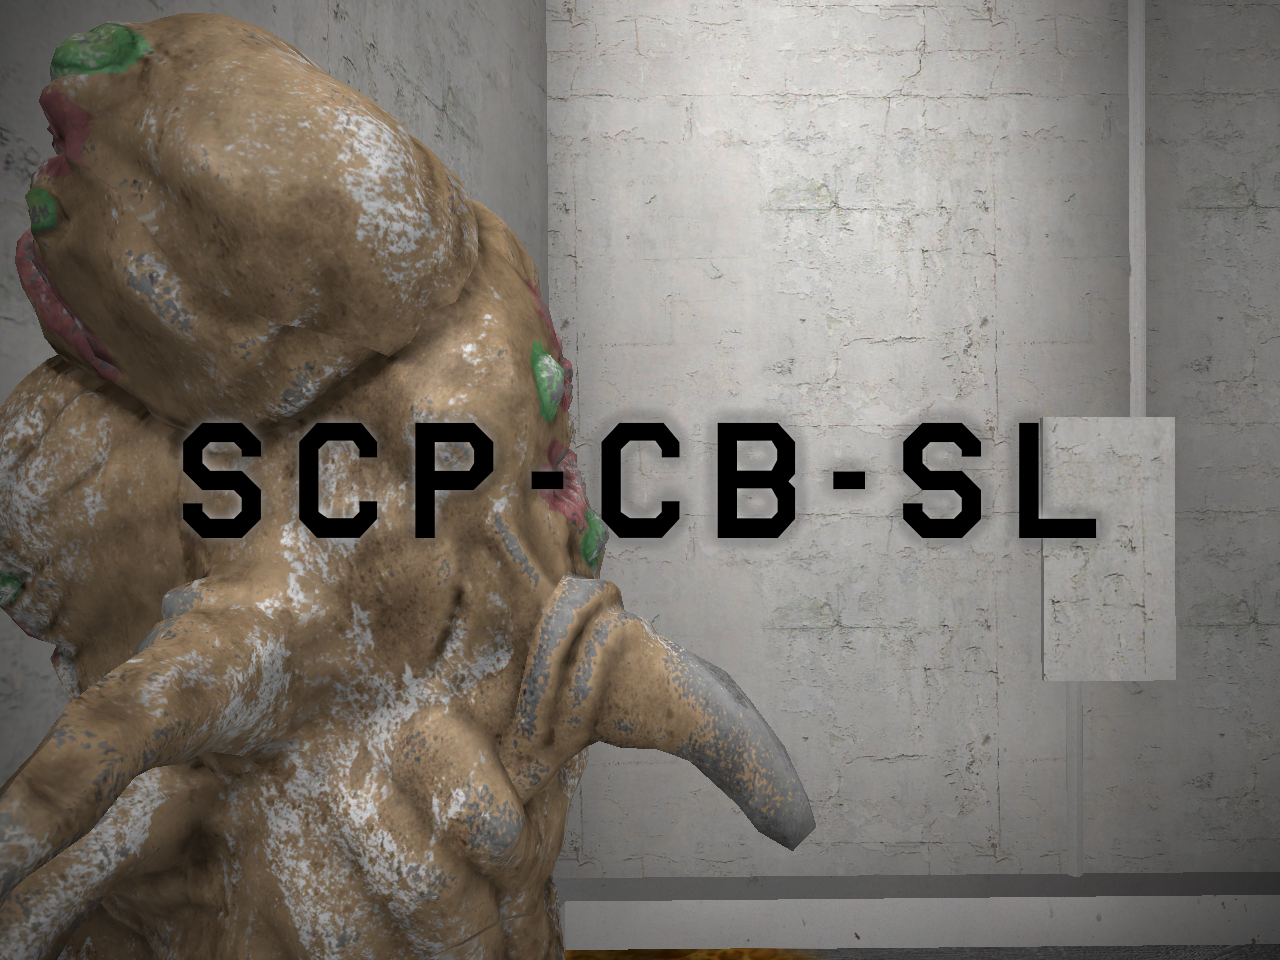 File:SCP CB First encounter of SCP-173.png - Wikimedia Commons